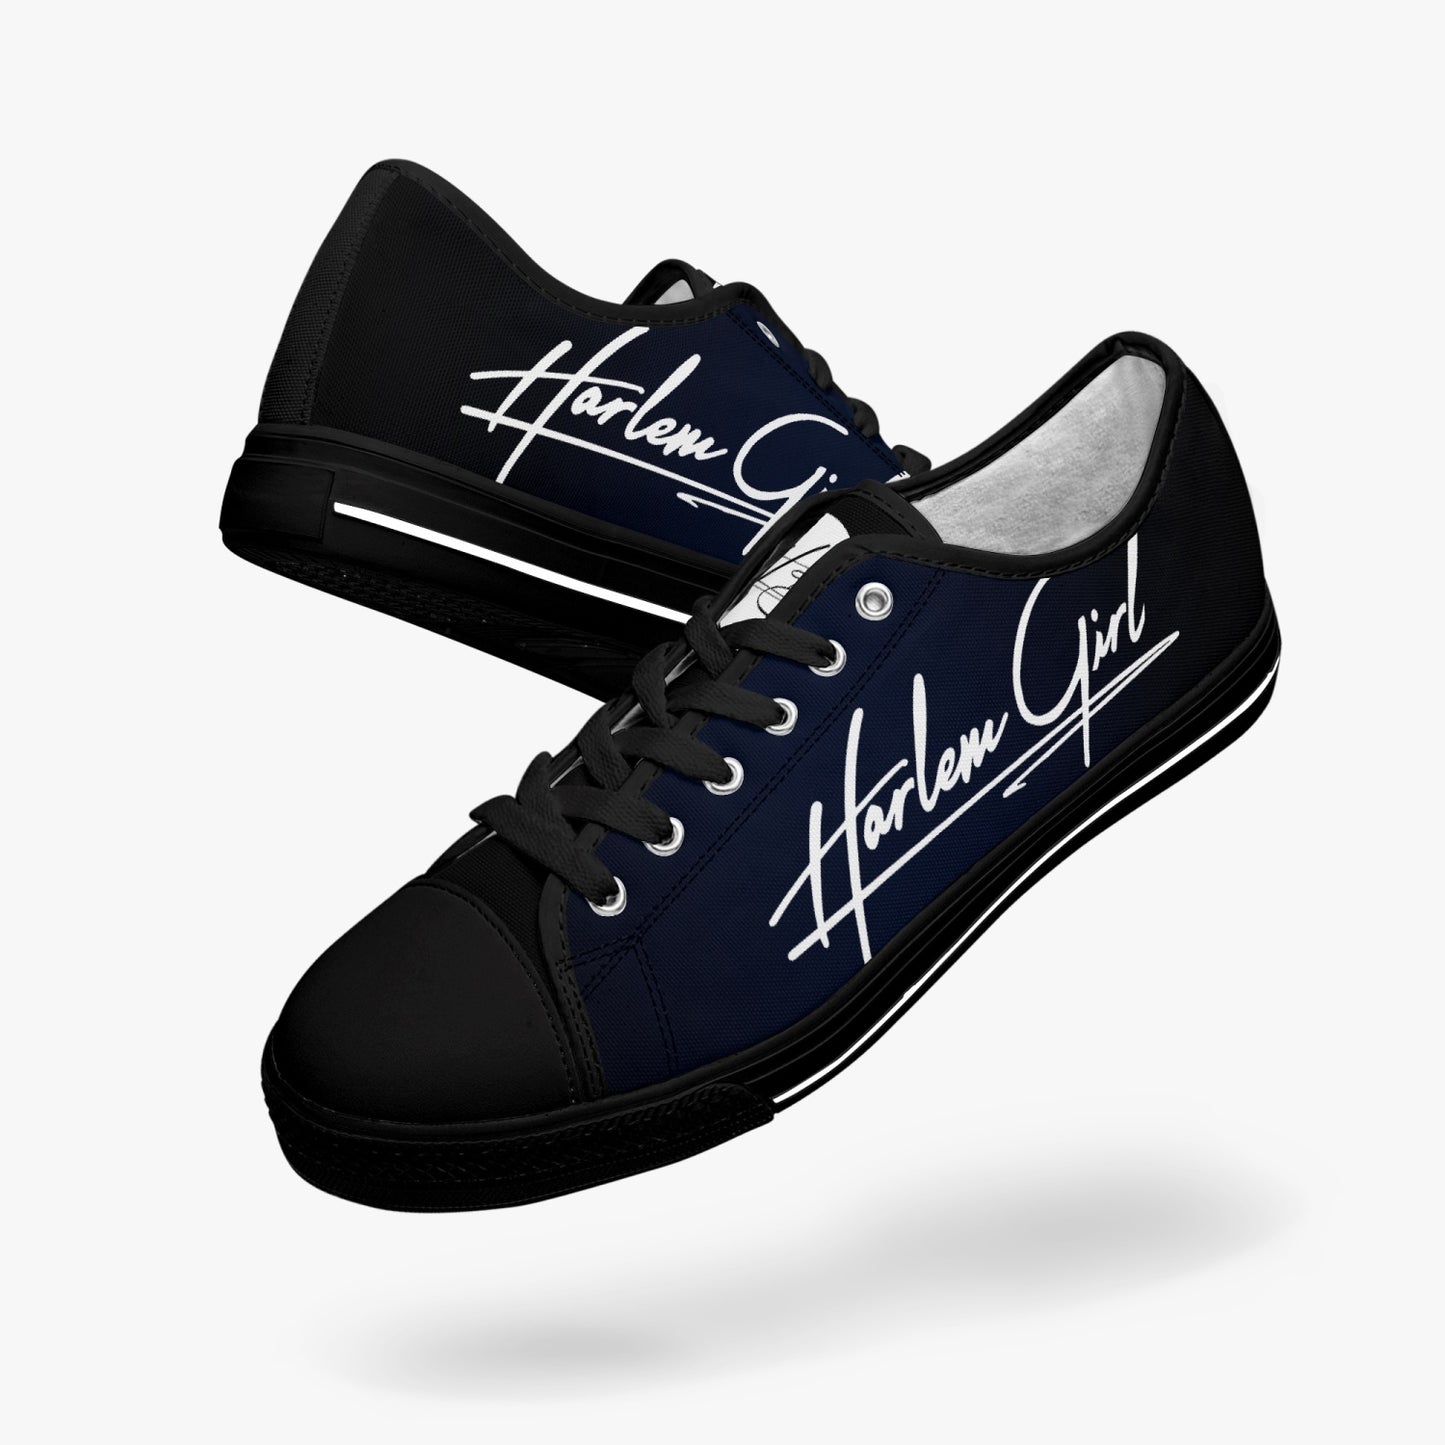 HB Harlem Girl "Lenox Ave" Classic Low Tops - BluBlac Onyx- Women (Black or White Sole)